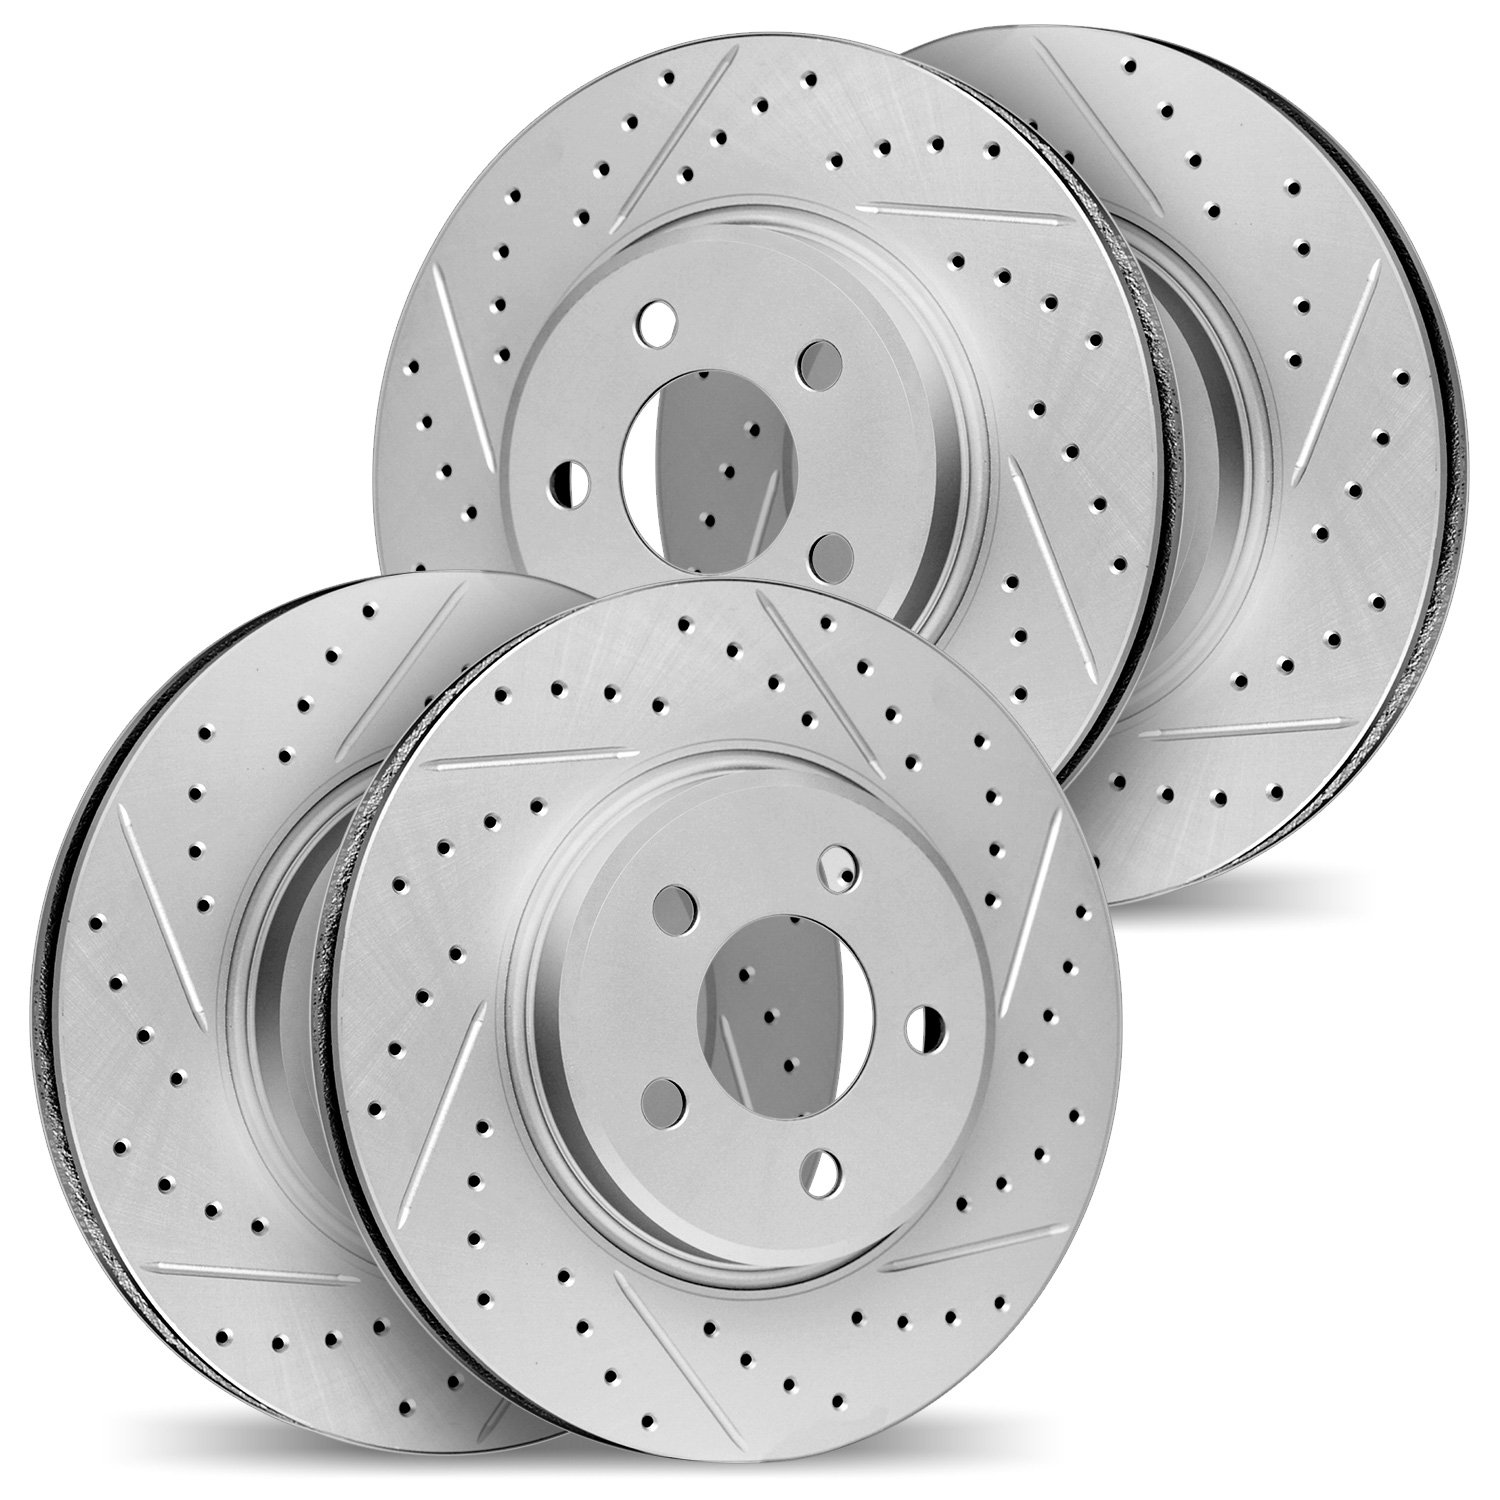 2004-67006 Geoperformance Drilled/Slotted Brake Rotors, 2003-2005 Infiniti/Nissan, Position: Front and Rear